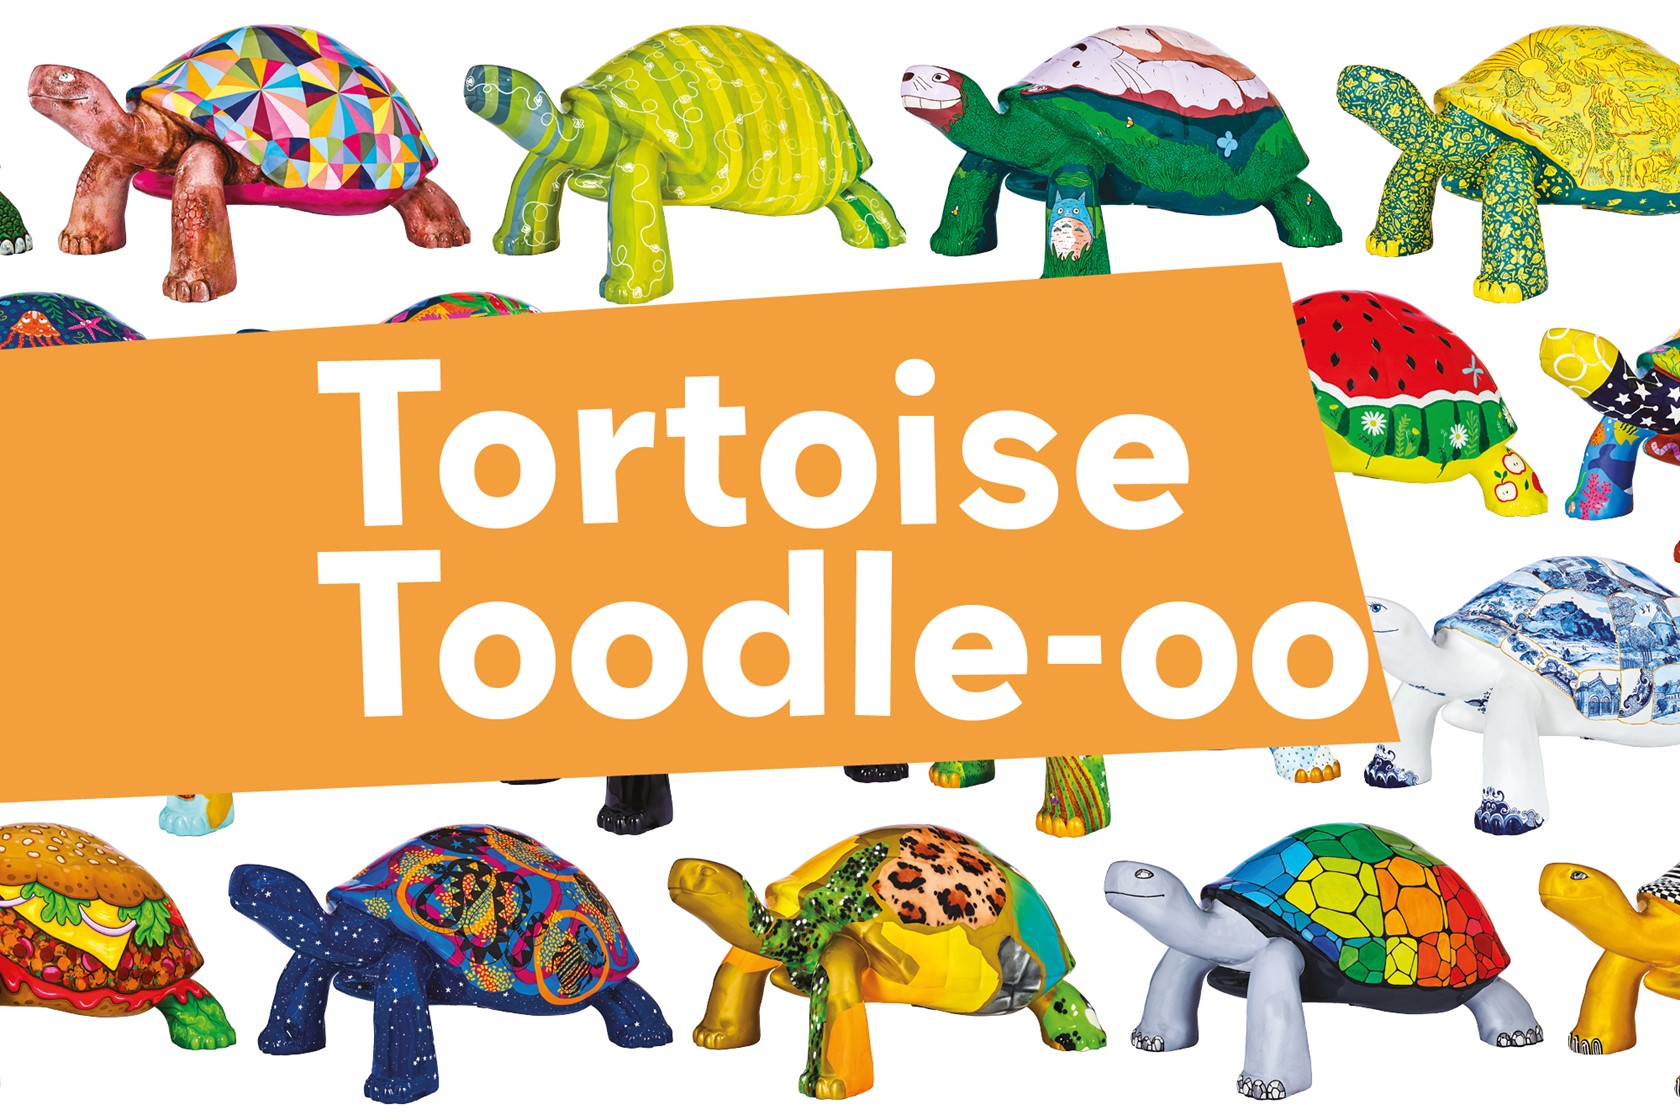 Tortoise Takeover Toodle Oo Website Event Graphic 2000 X 1333 AW